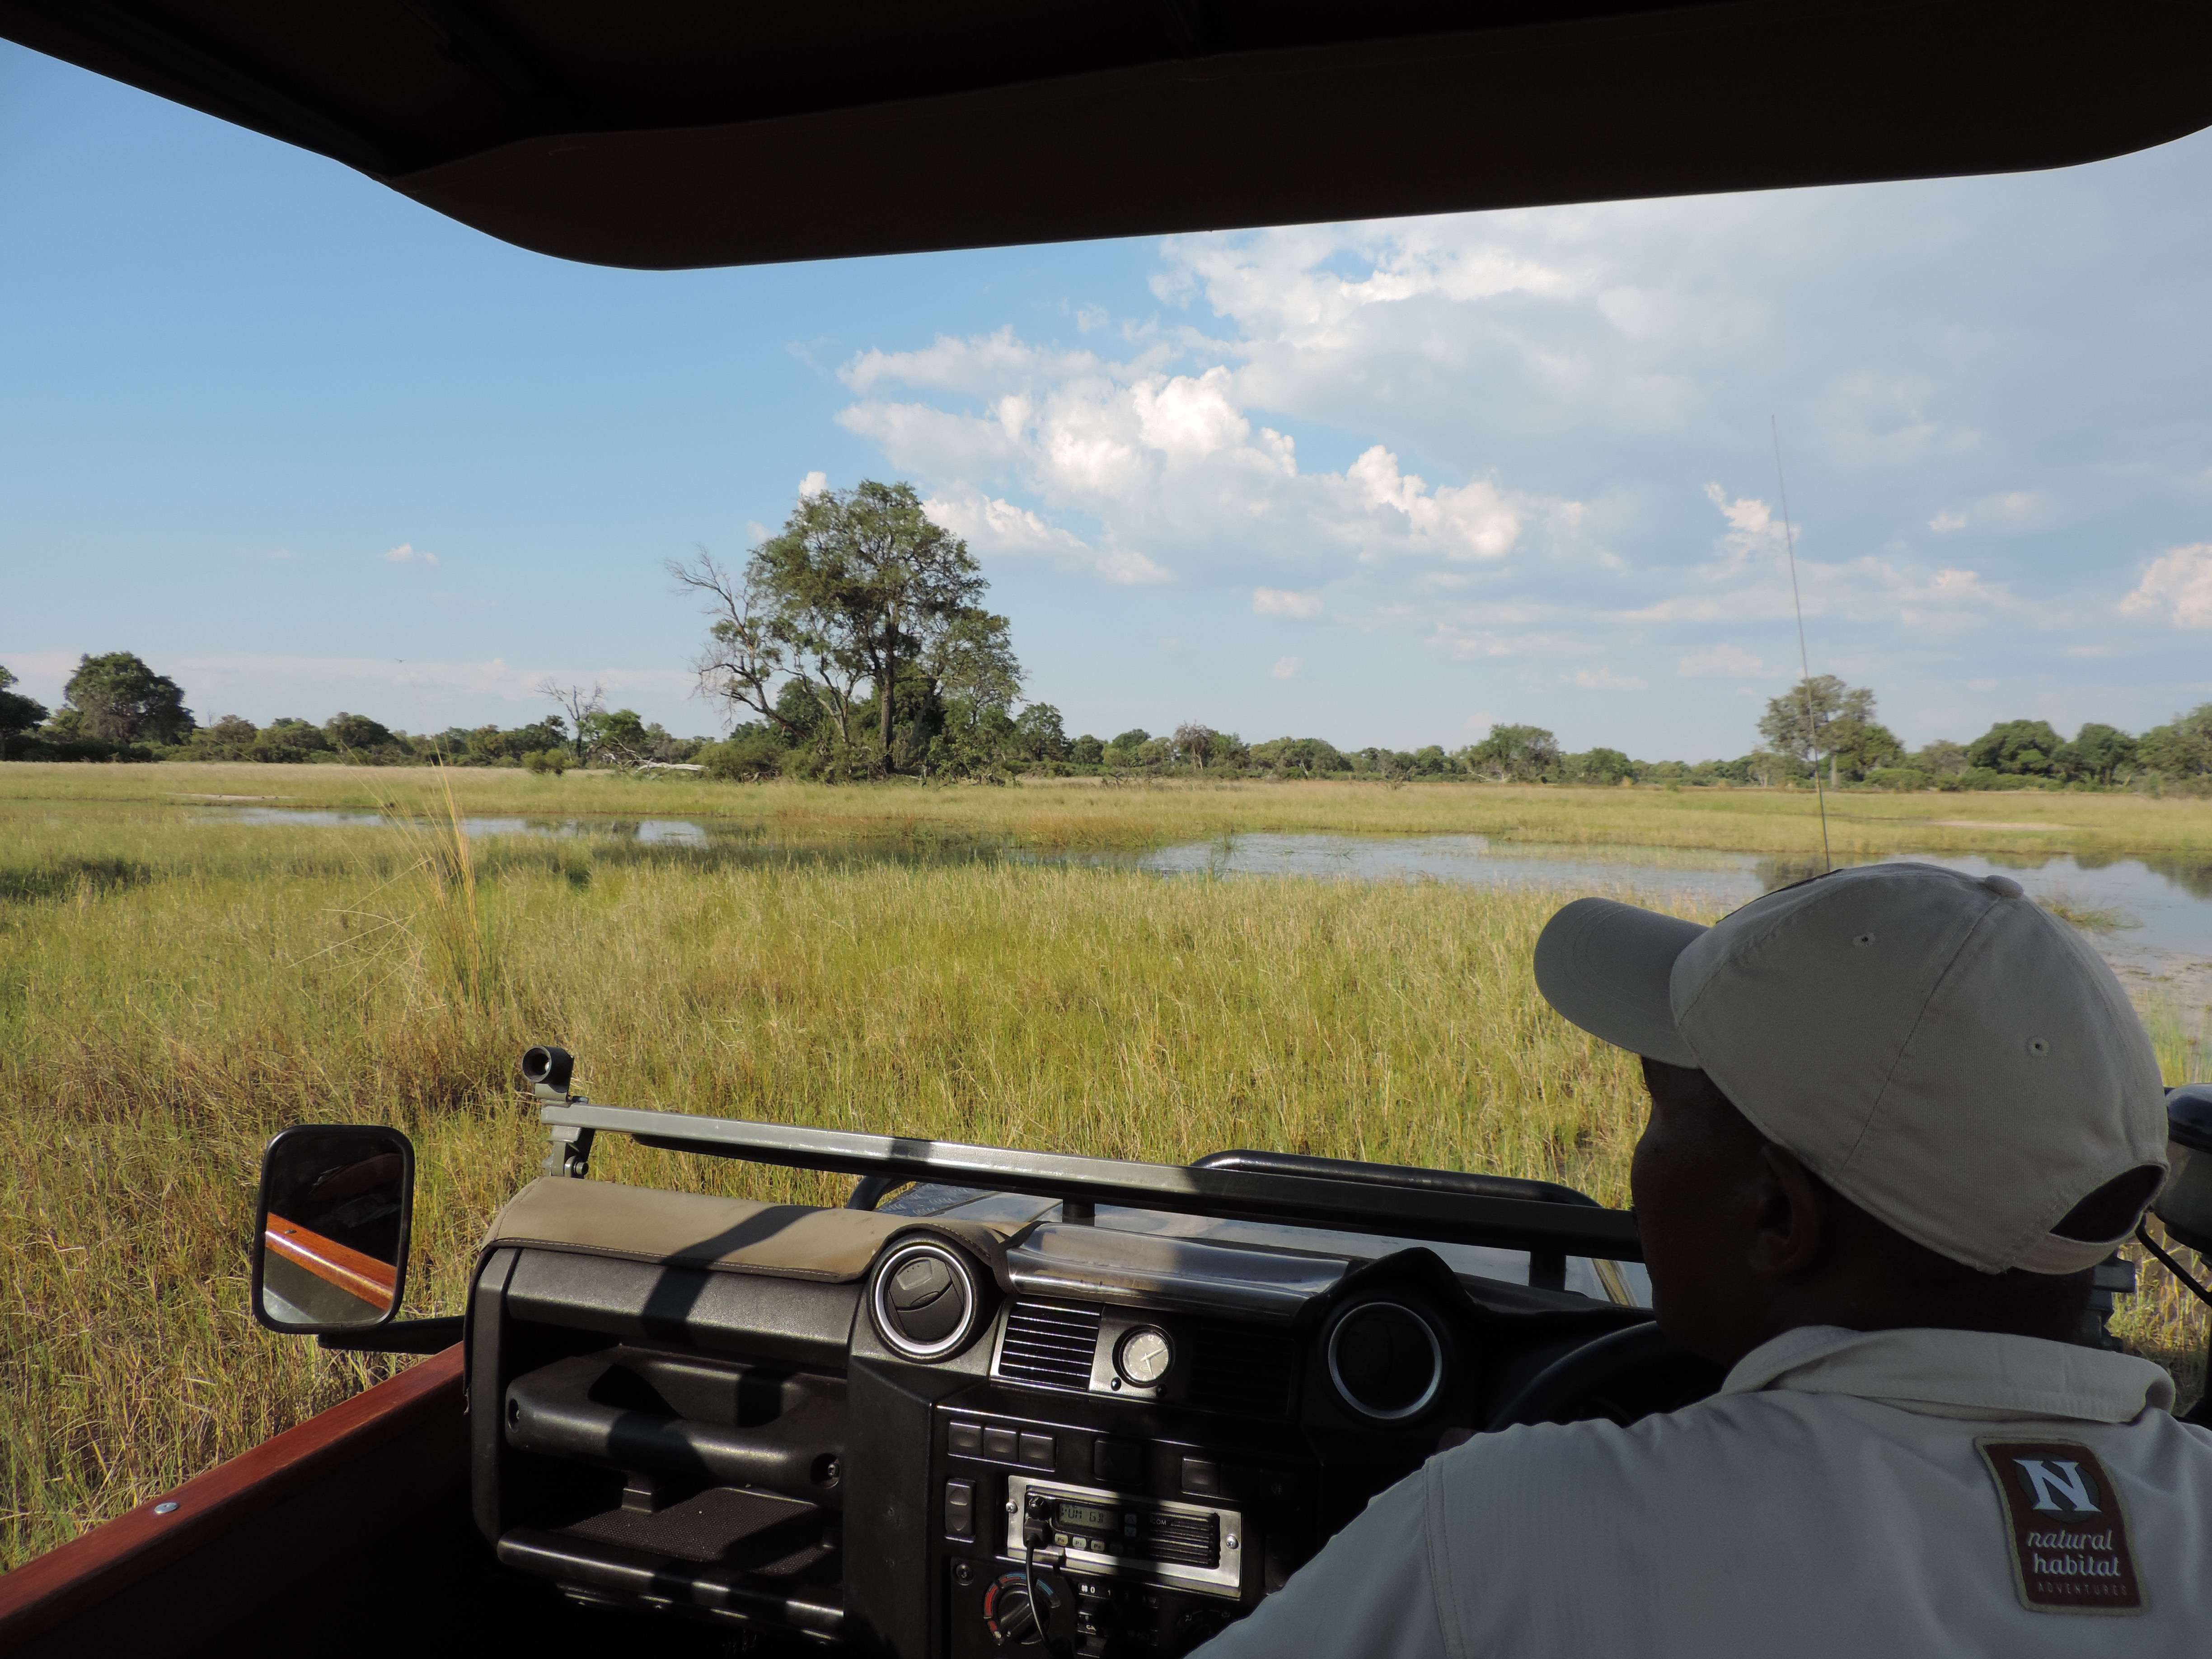 Sometimes your jeep is the only sign of human life for miles around during the green season, which really allows you to connect with nature in a very intimate way. © Deborah Ackerman/WWF-US